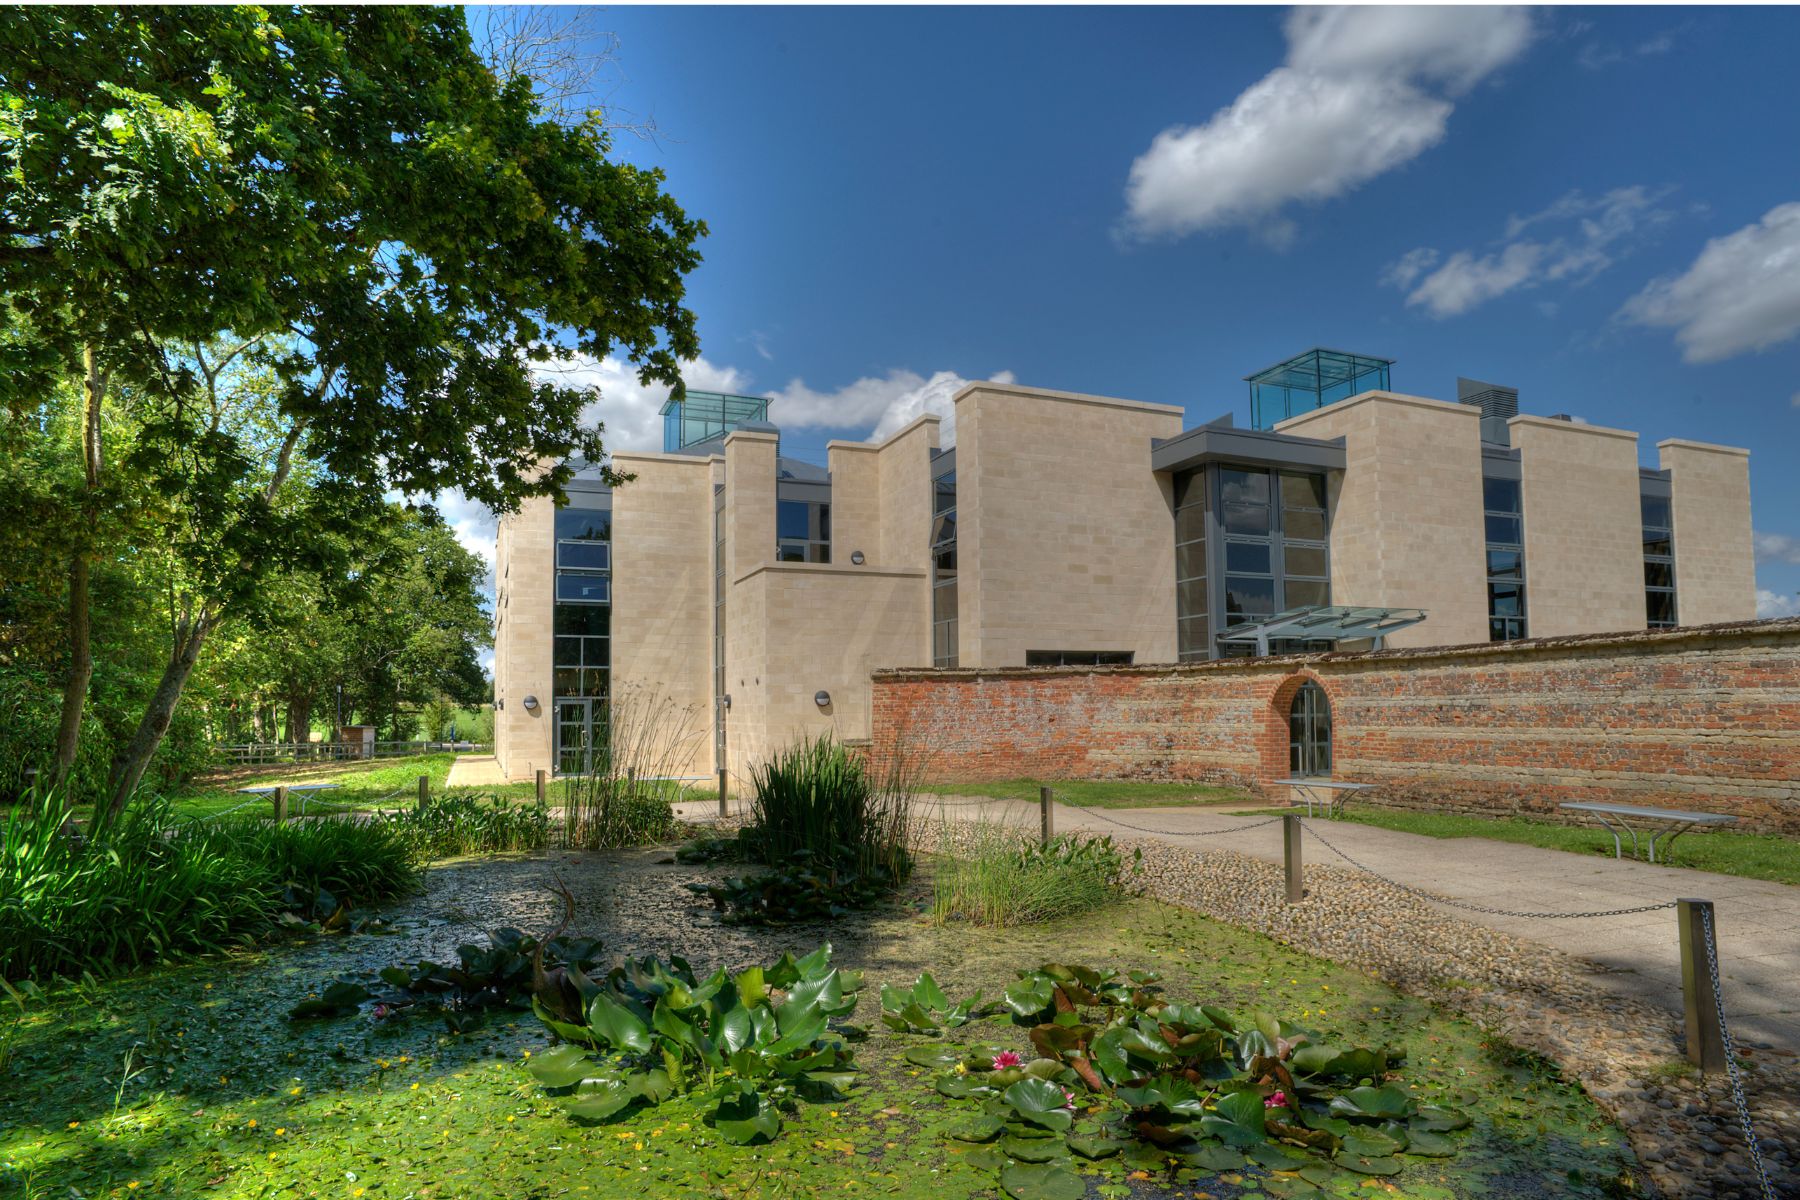 Cokethorpe Dining Hall and Sixth Form Centre - About - Facilities and Parkland - The Senior School - An Independent Day School